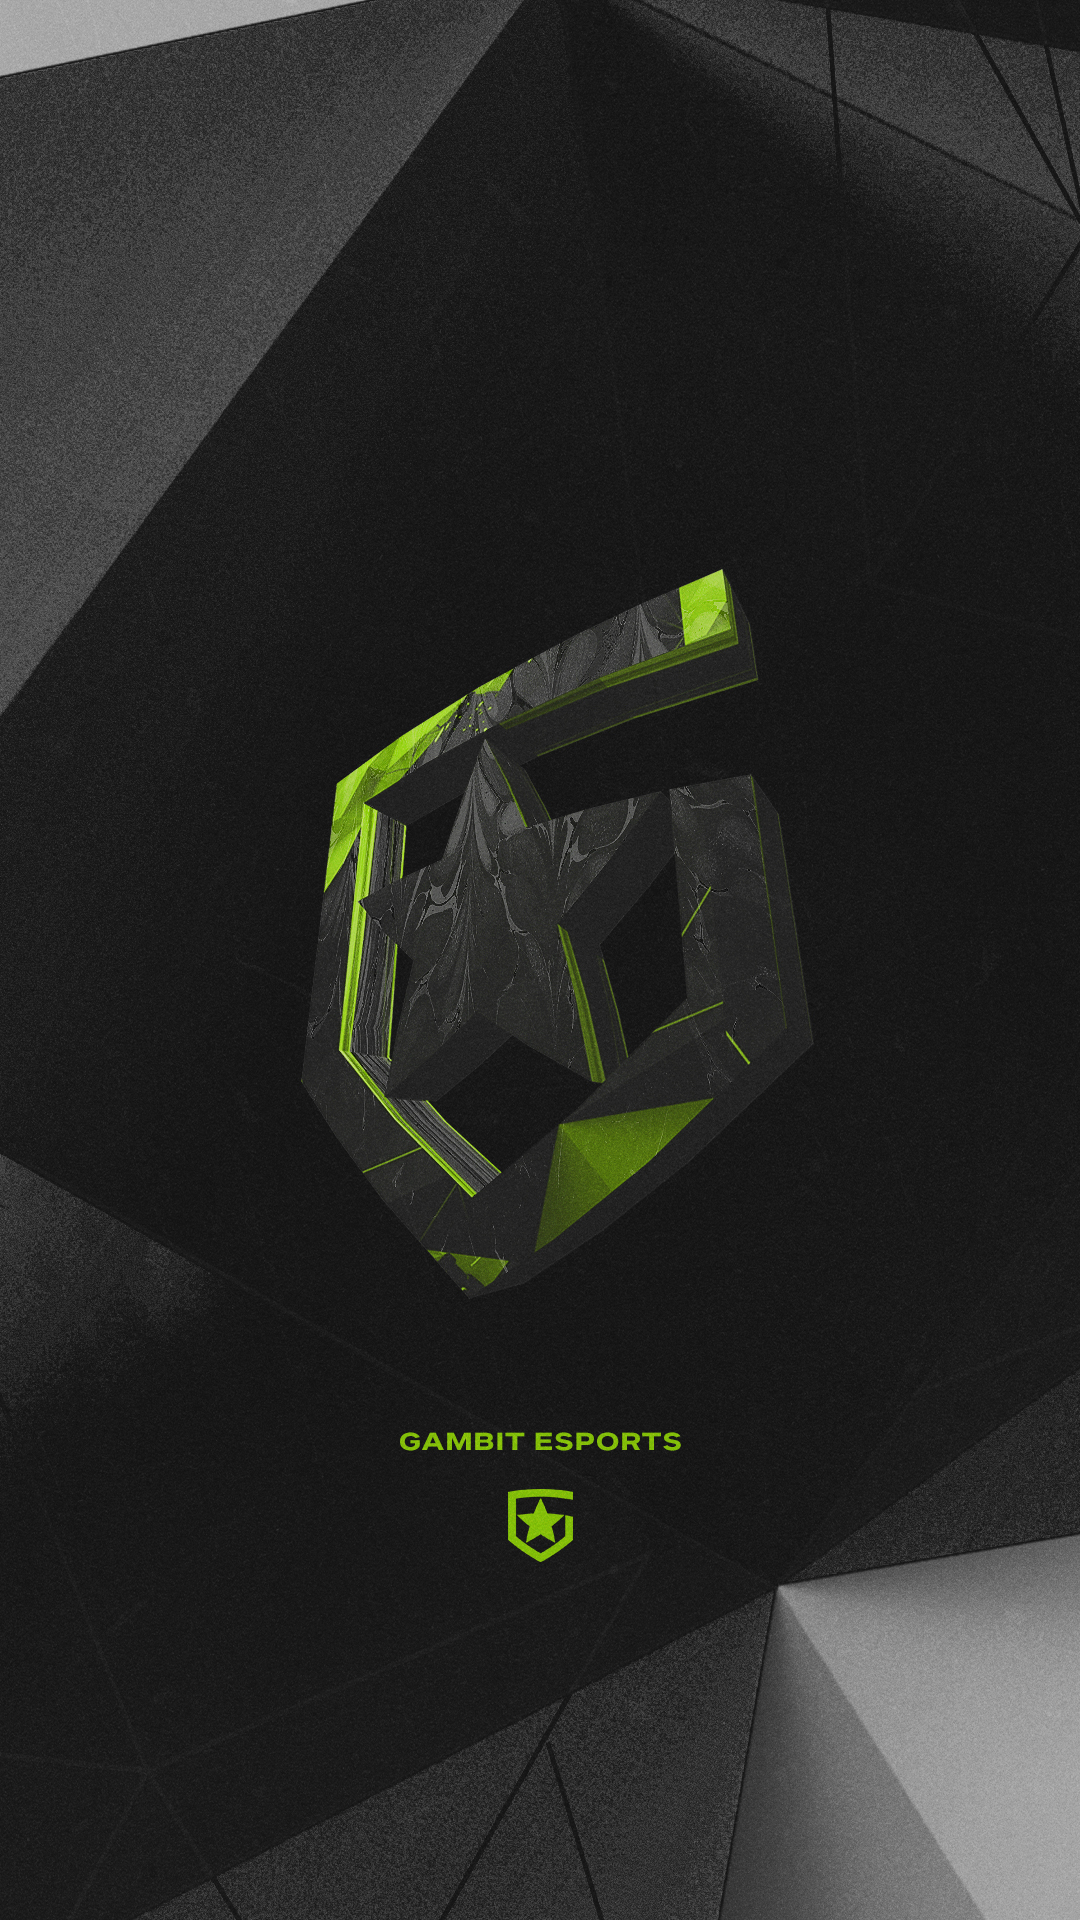 Gambit Esports ready to support #GambitCSGO at #ESLProLeague